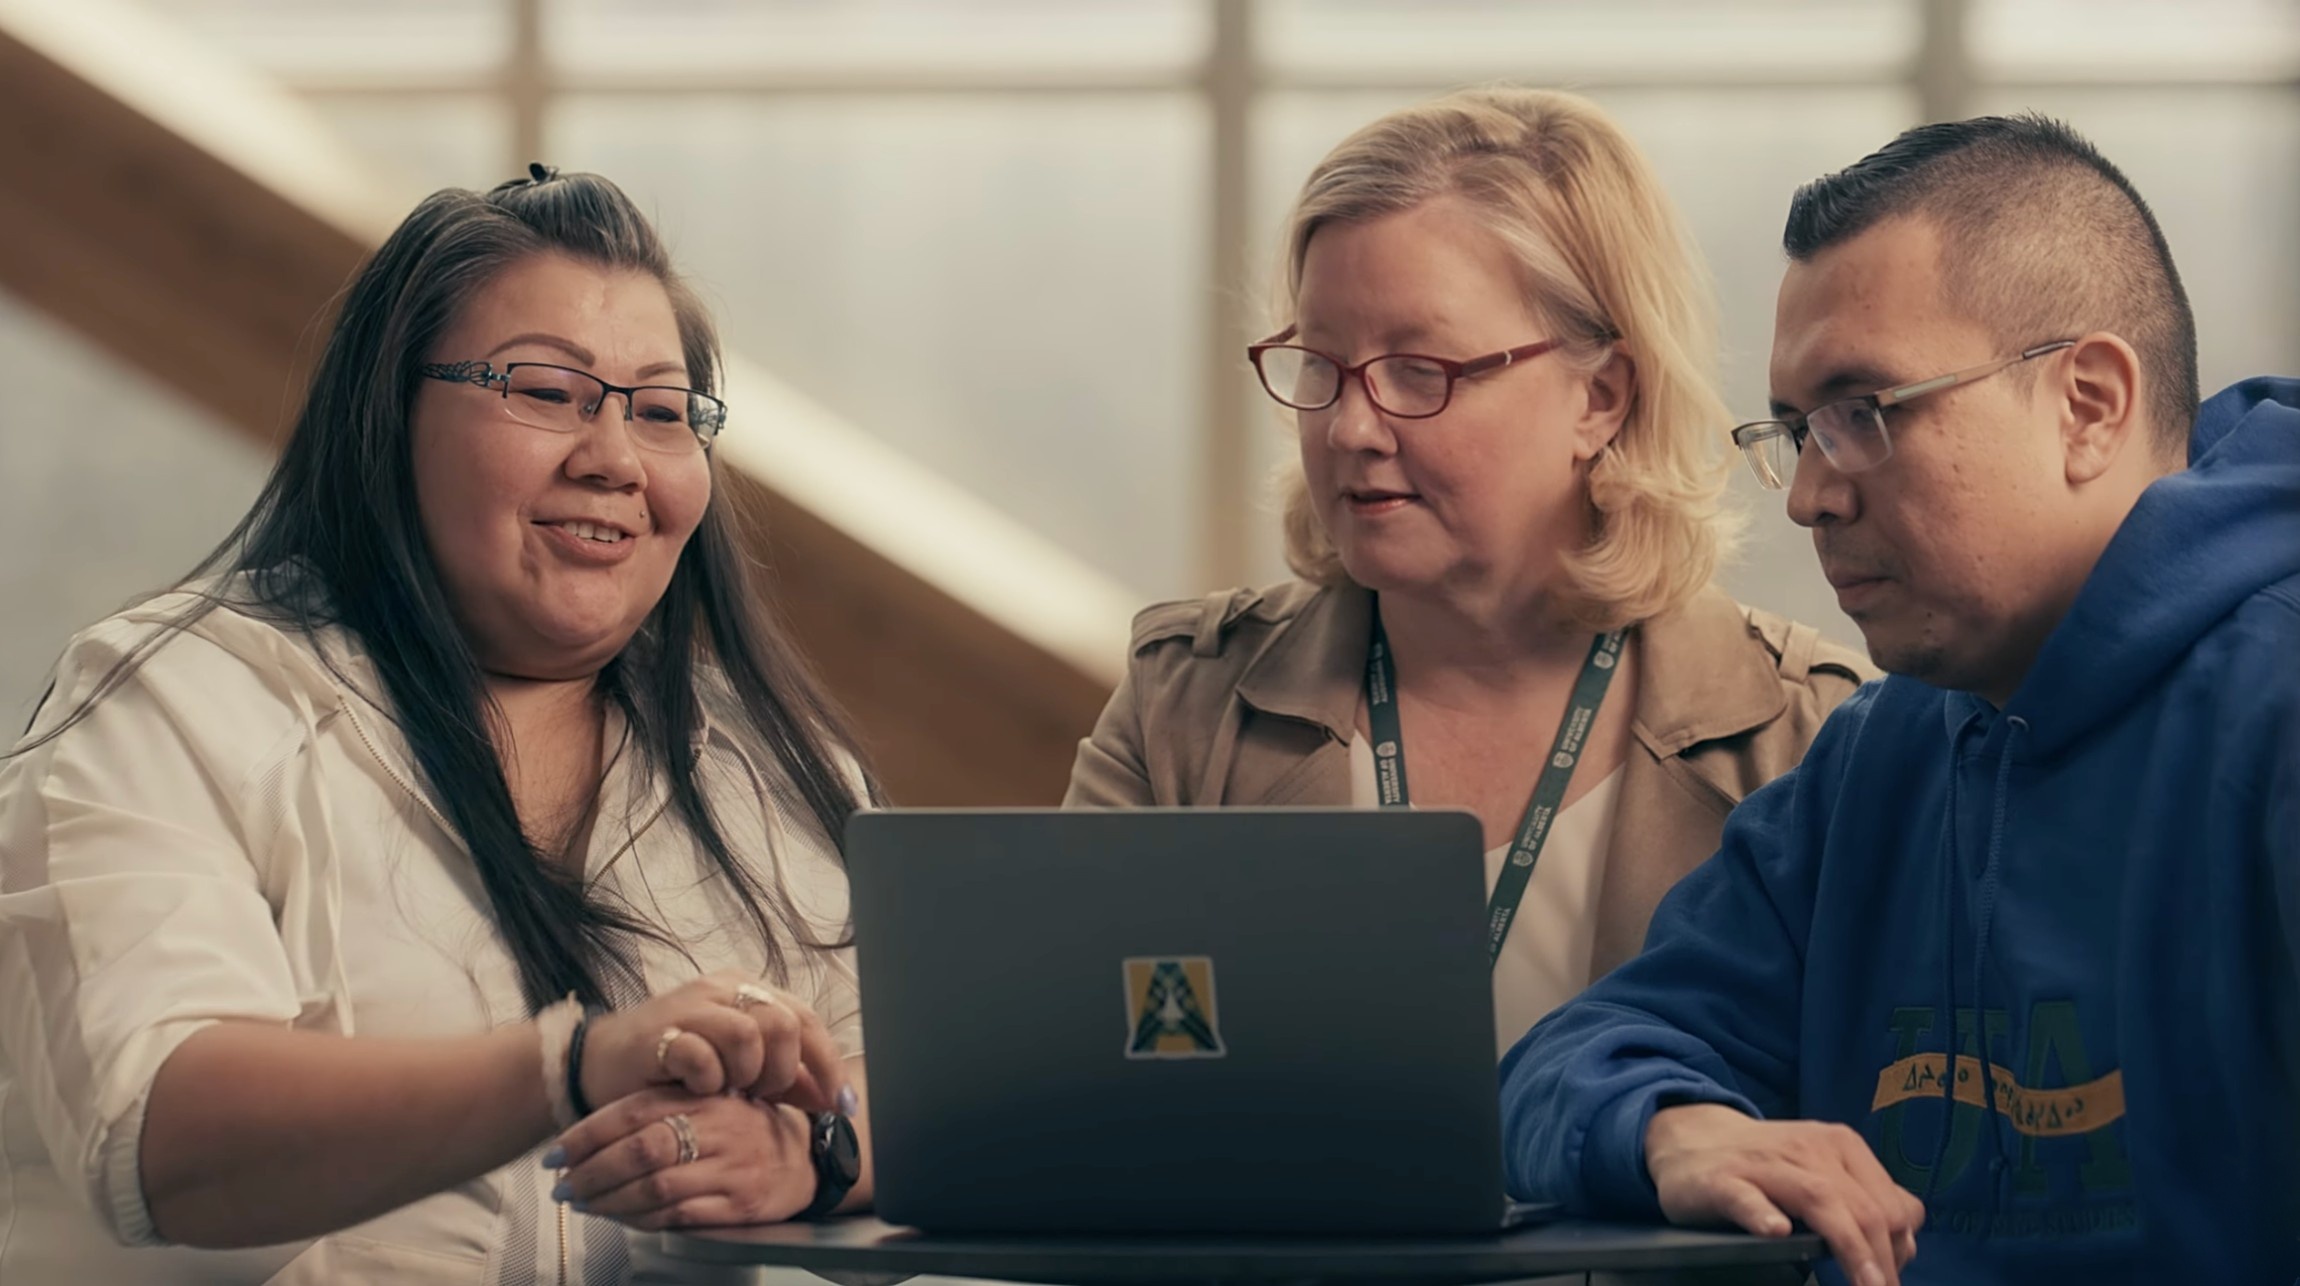 Three members of the U of A community engage in a discussion while looking at a laptop. (Photo: Supplied)